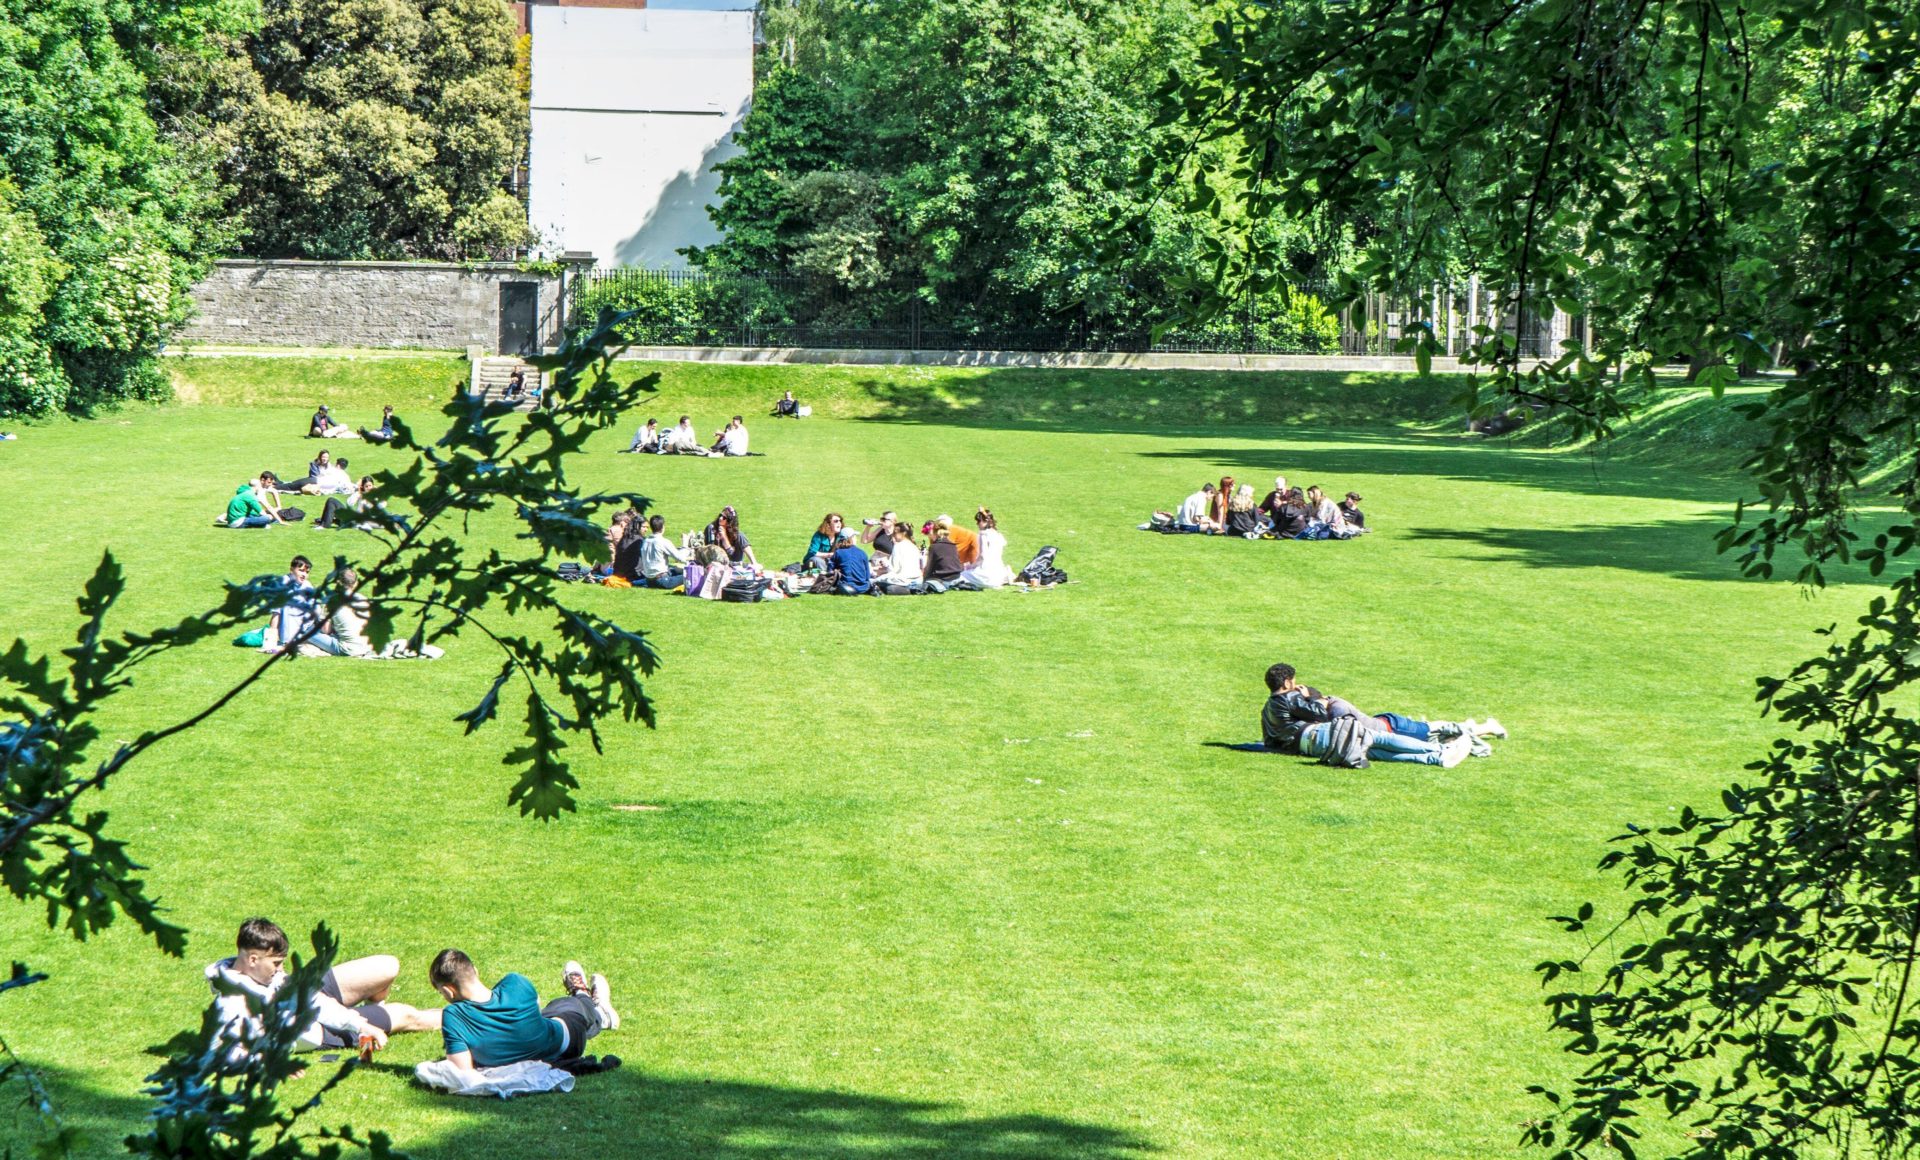 People enjoying sunshine at the Iveagh Gardens, Dublin in May 2022.